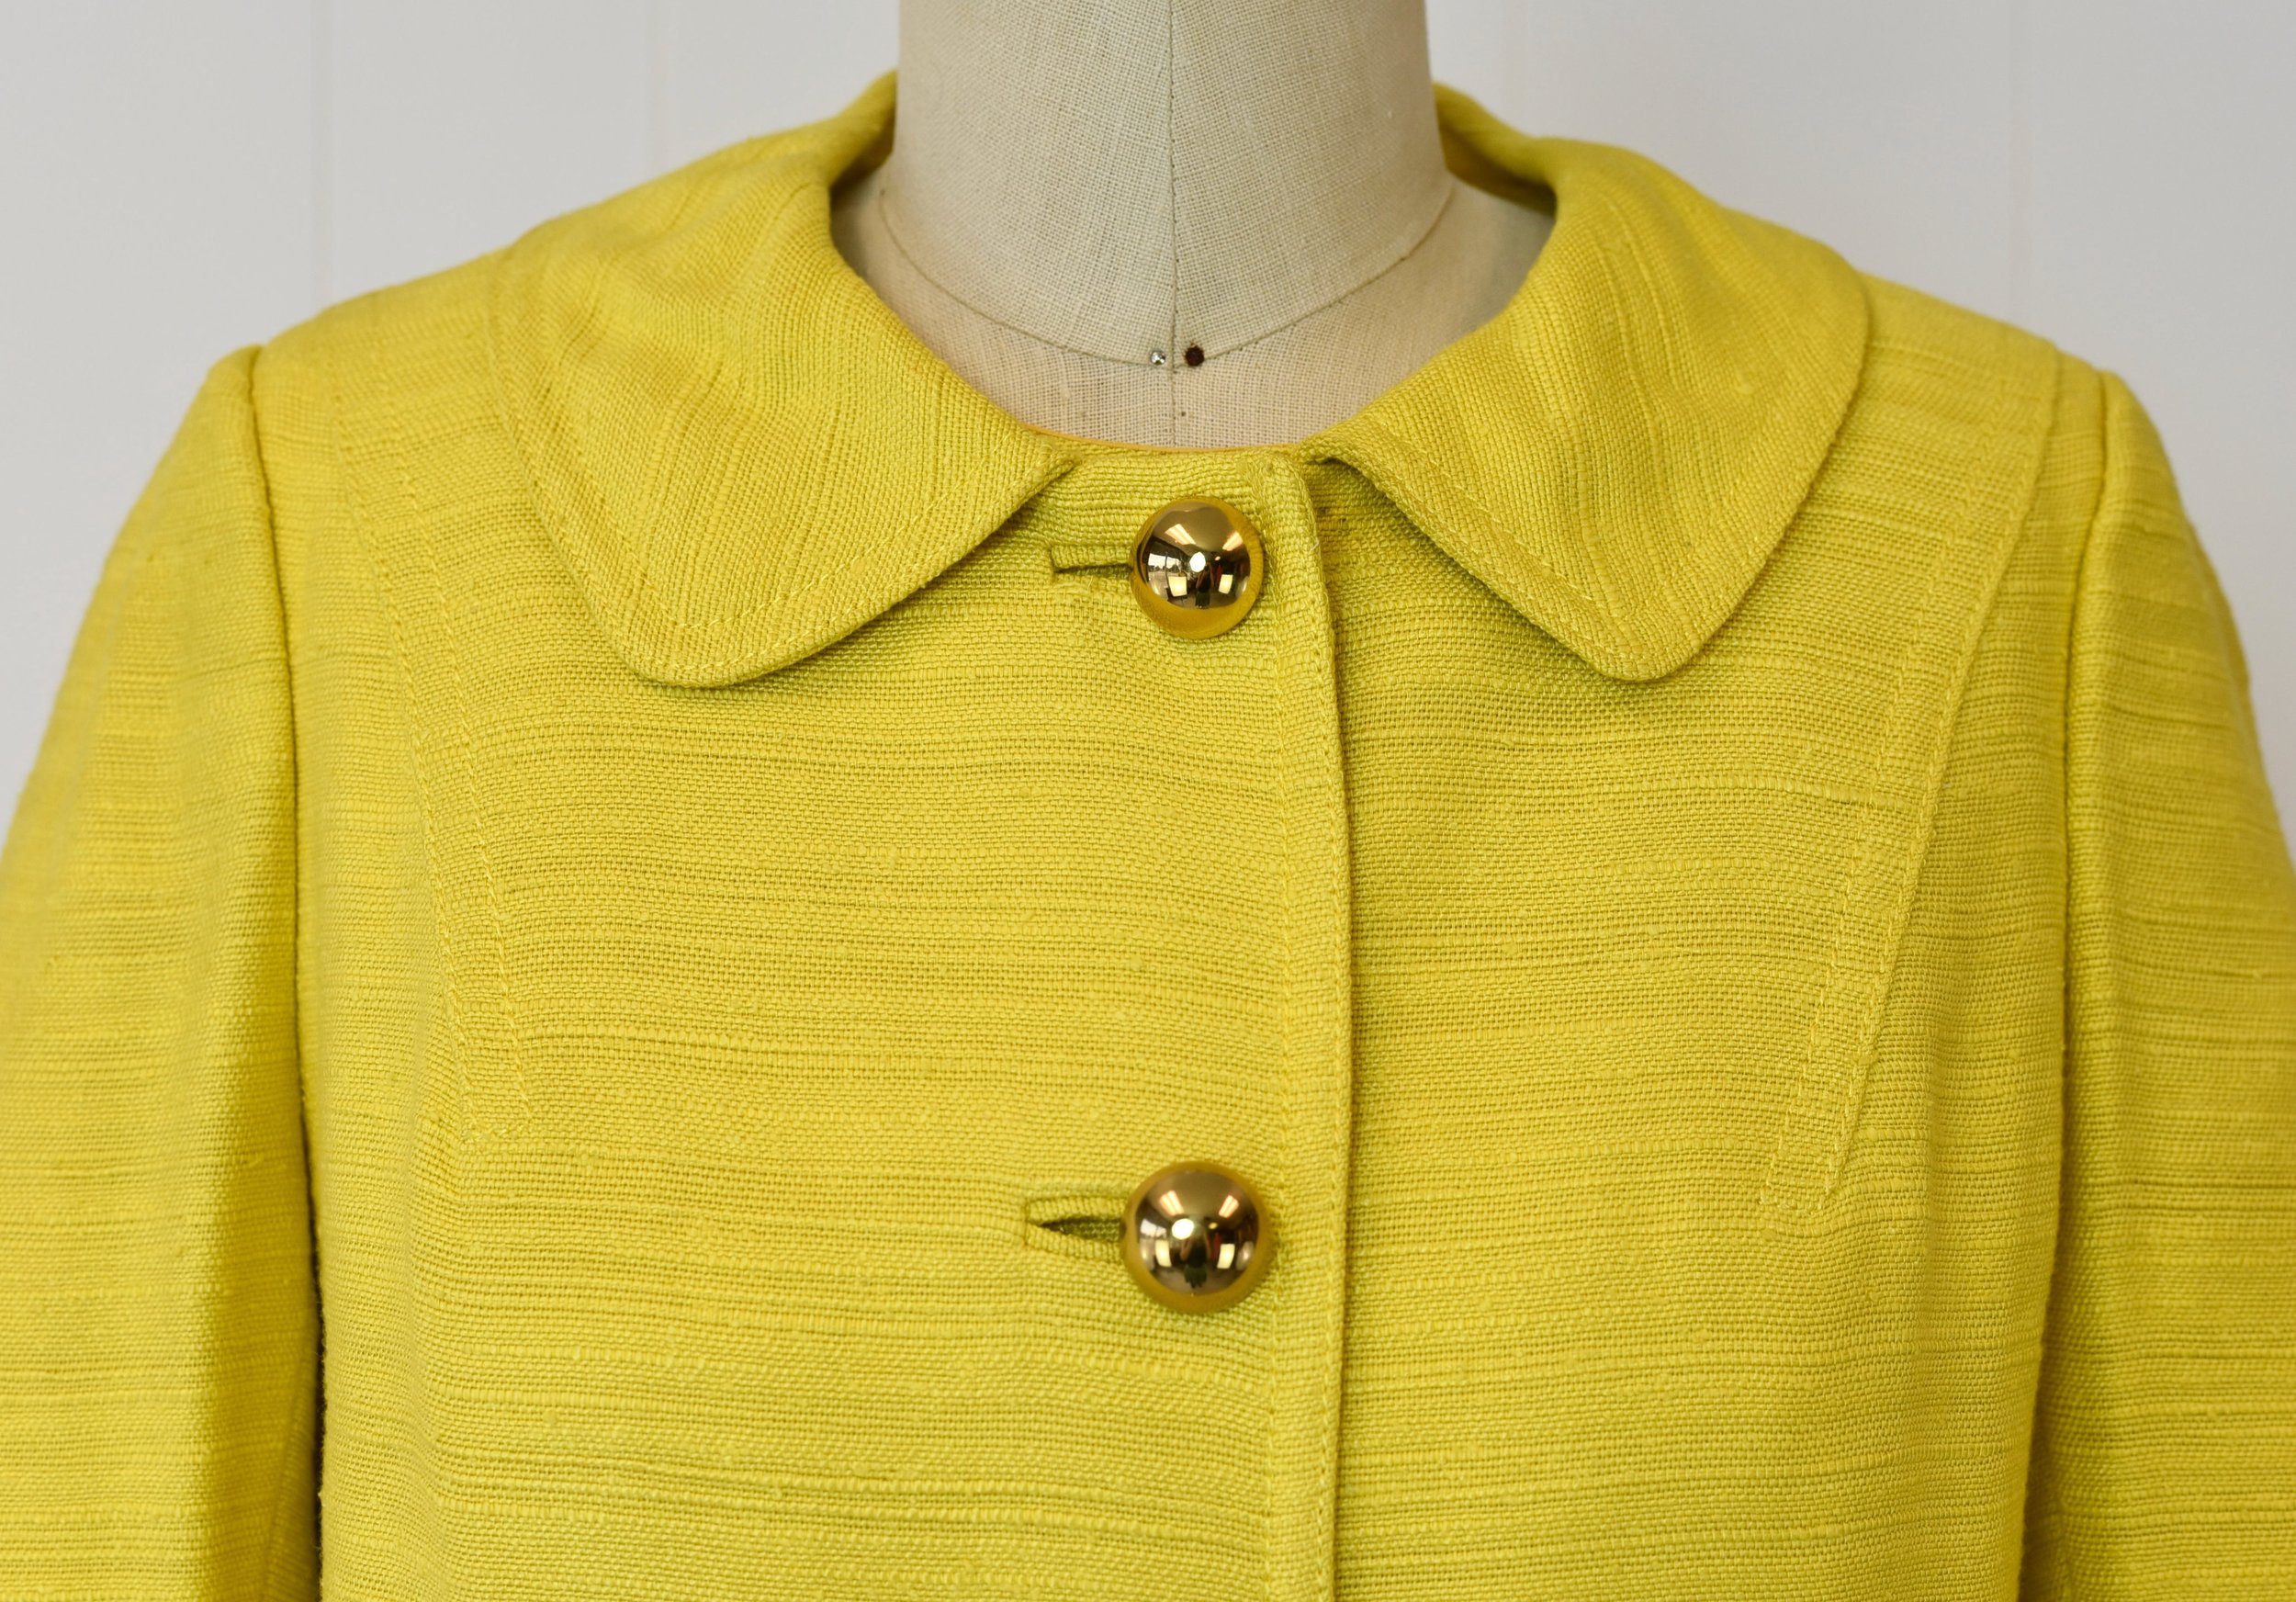 Louis Feraud - Authenticated Jacket - Wool Yellow Plain for Women, Good Condition